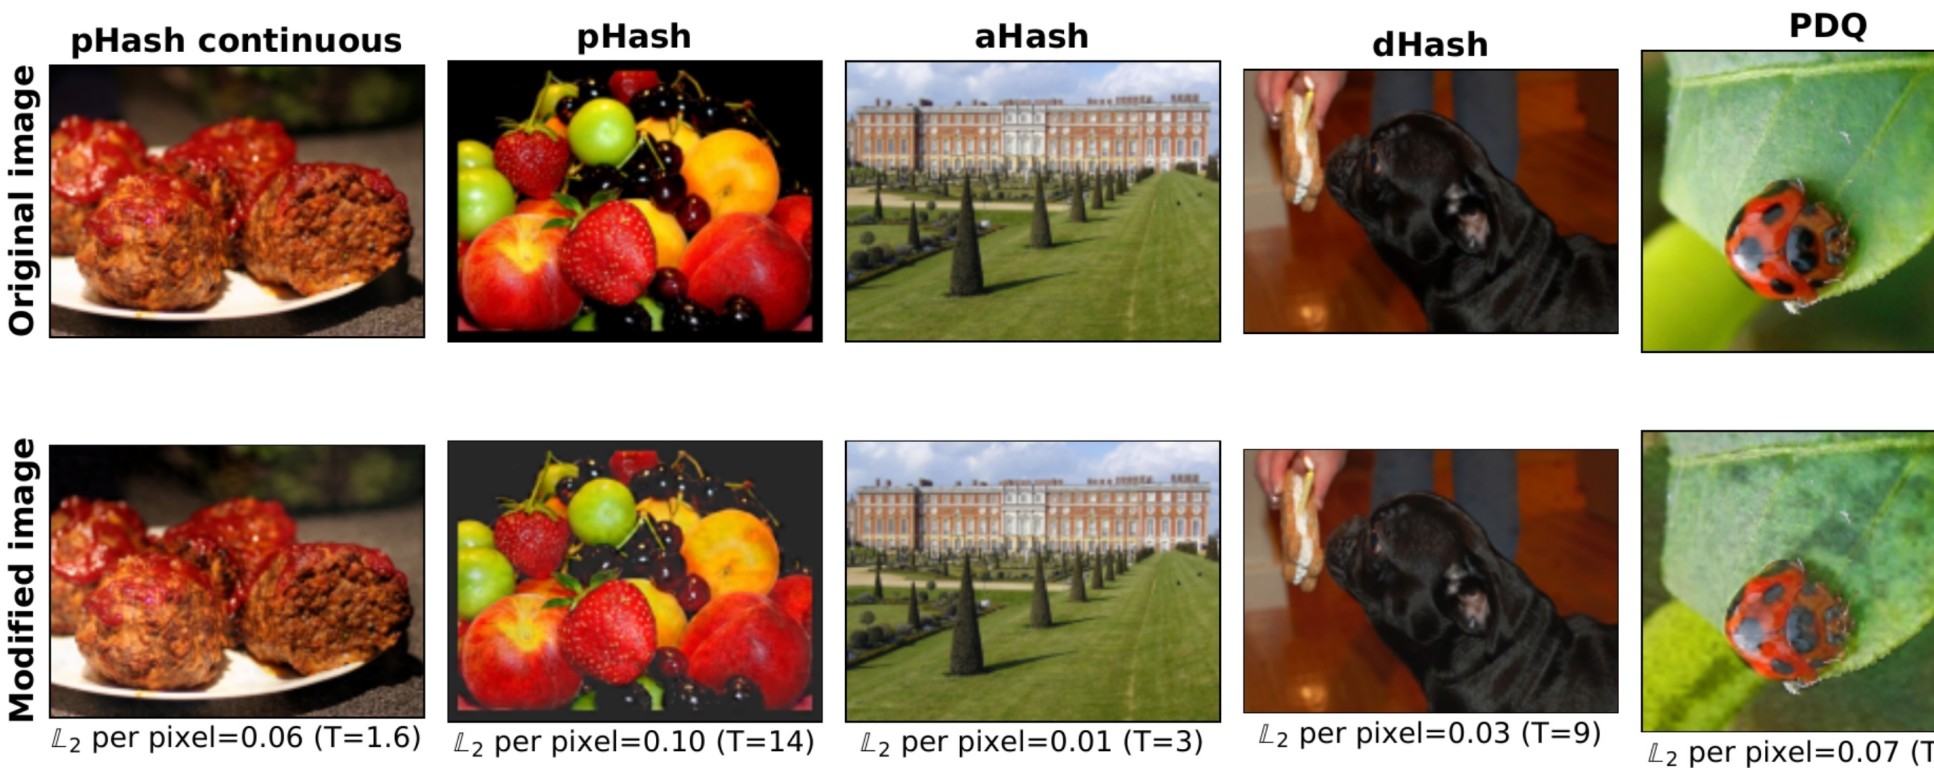 Near-identical images demonstrate how methods of detecting illegal content are not robust